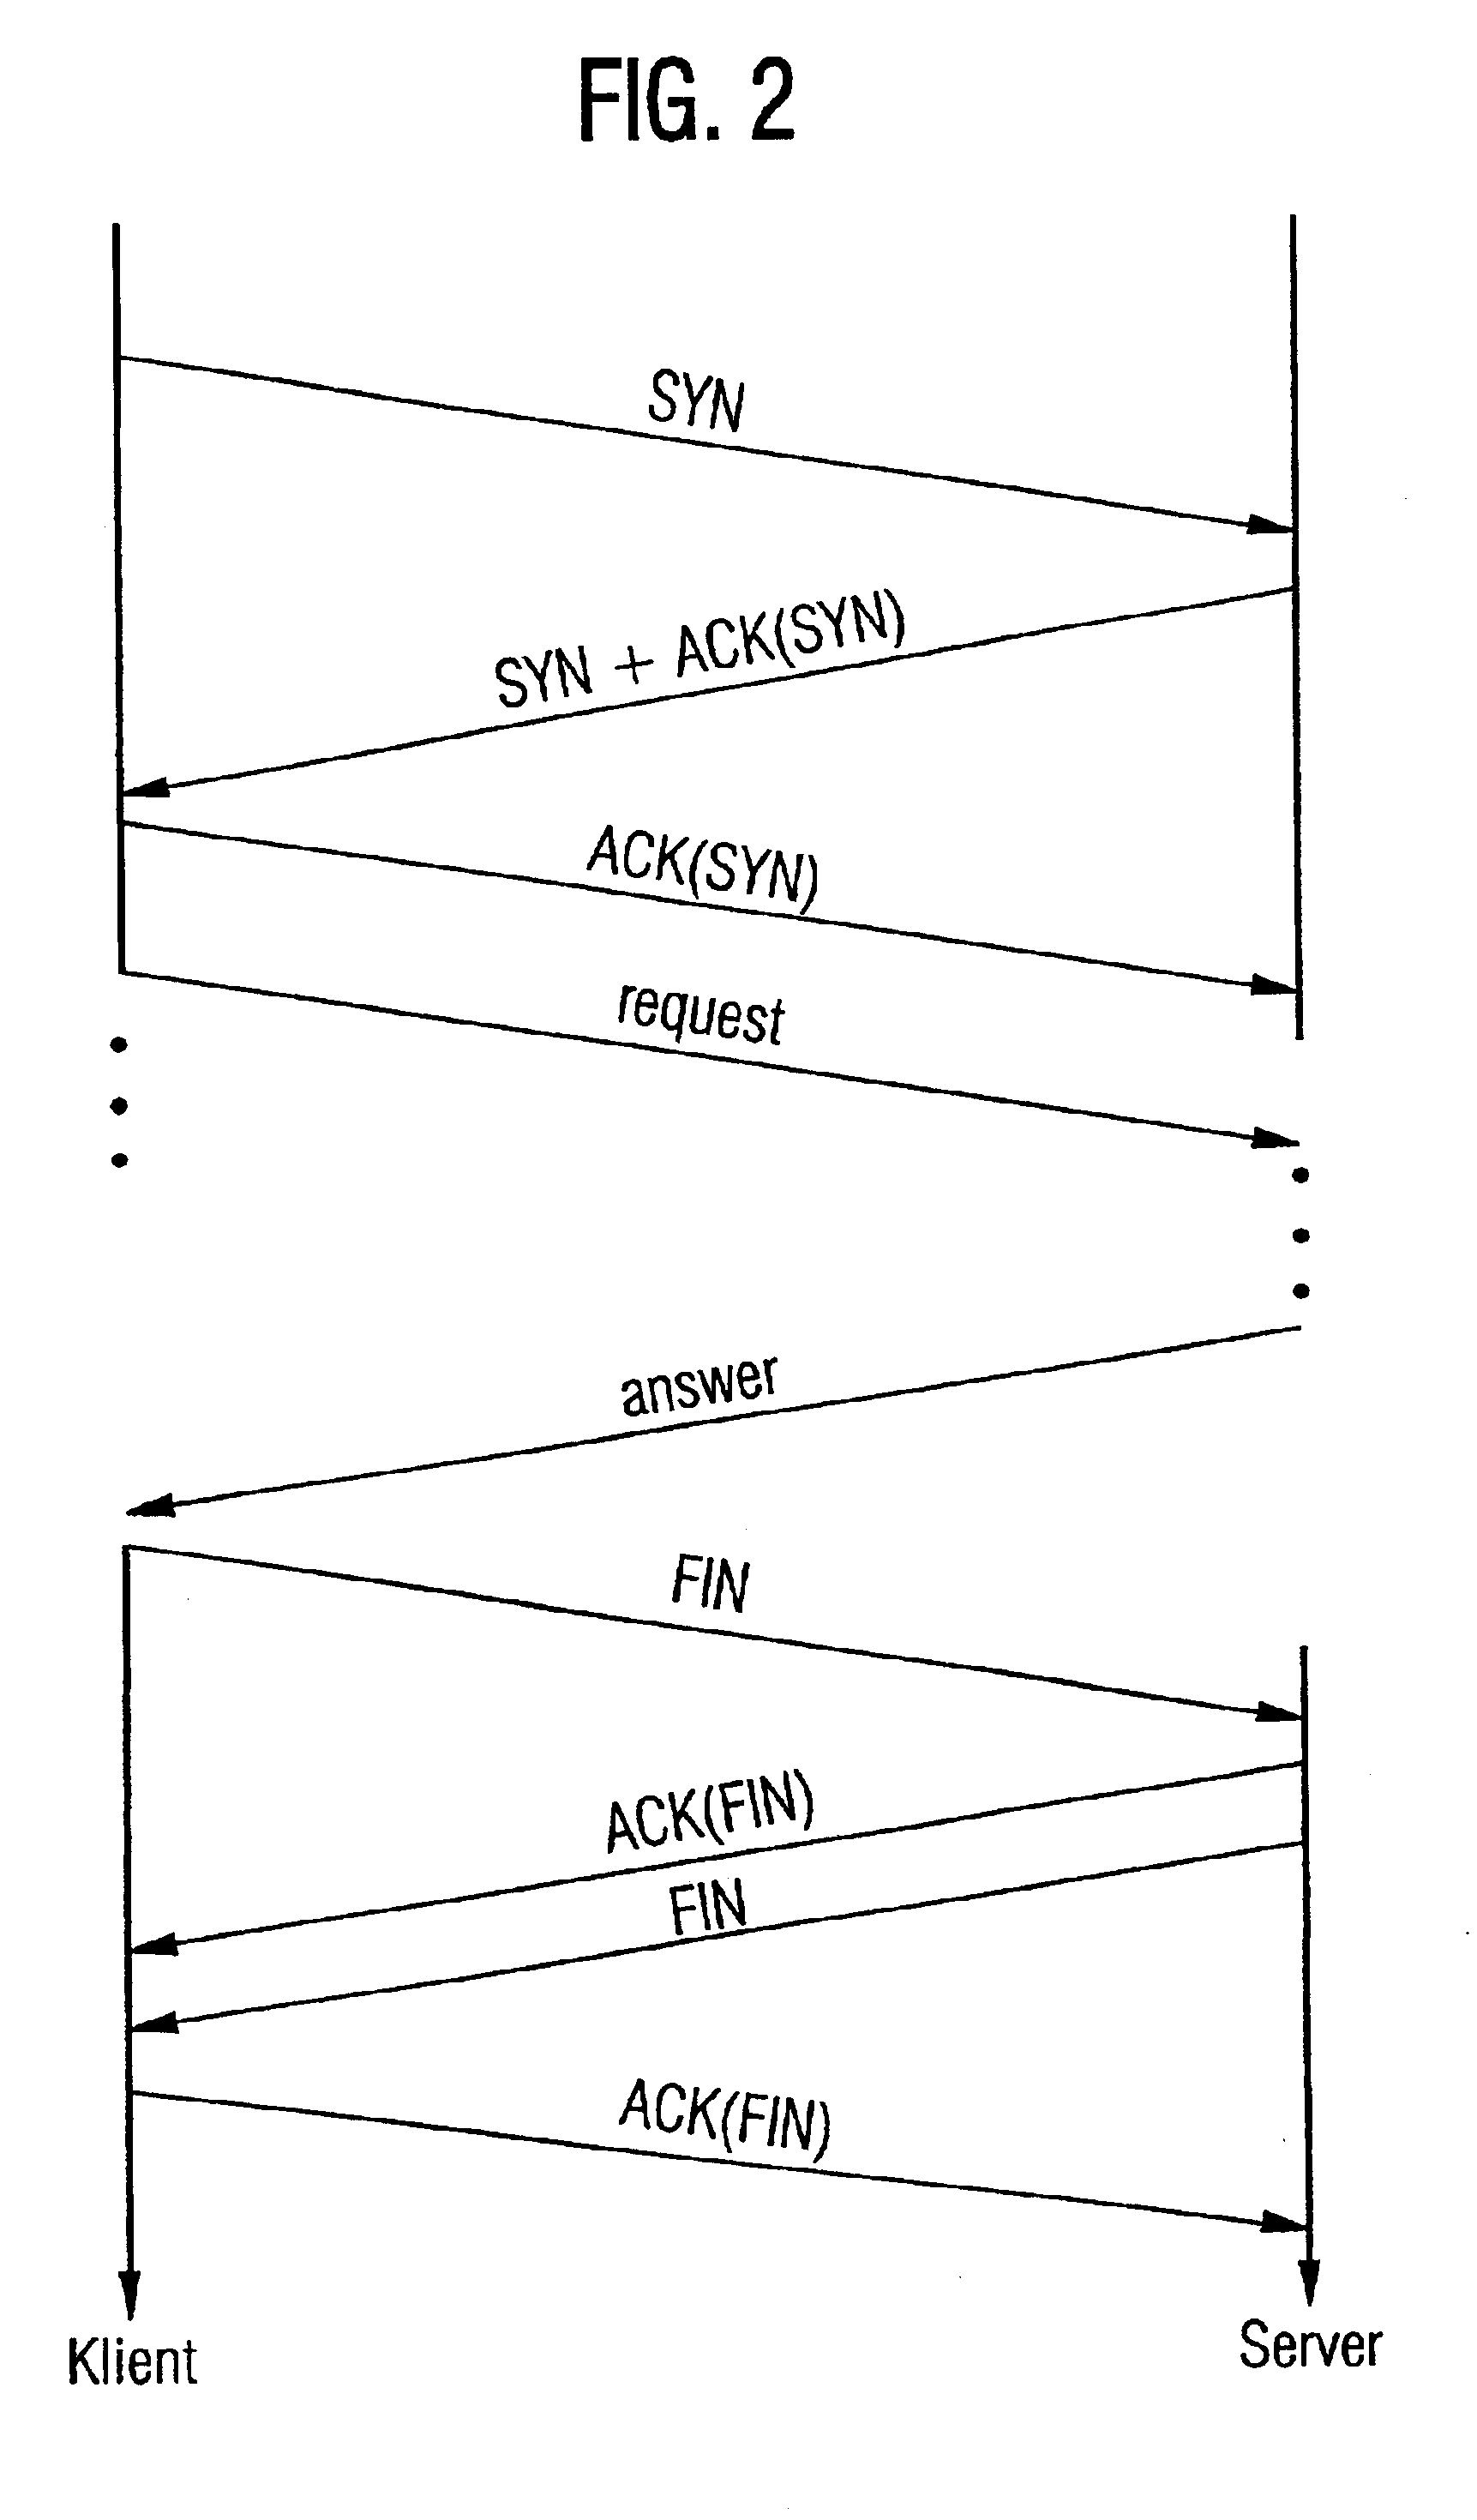 Method and apparatus for improving performance in a network with high delay times